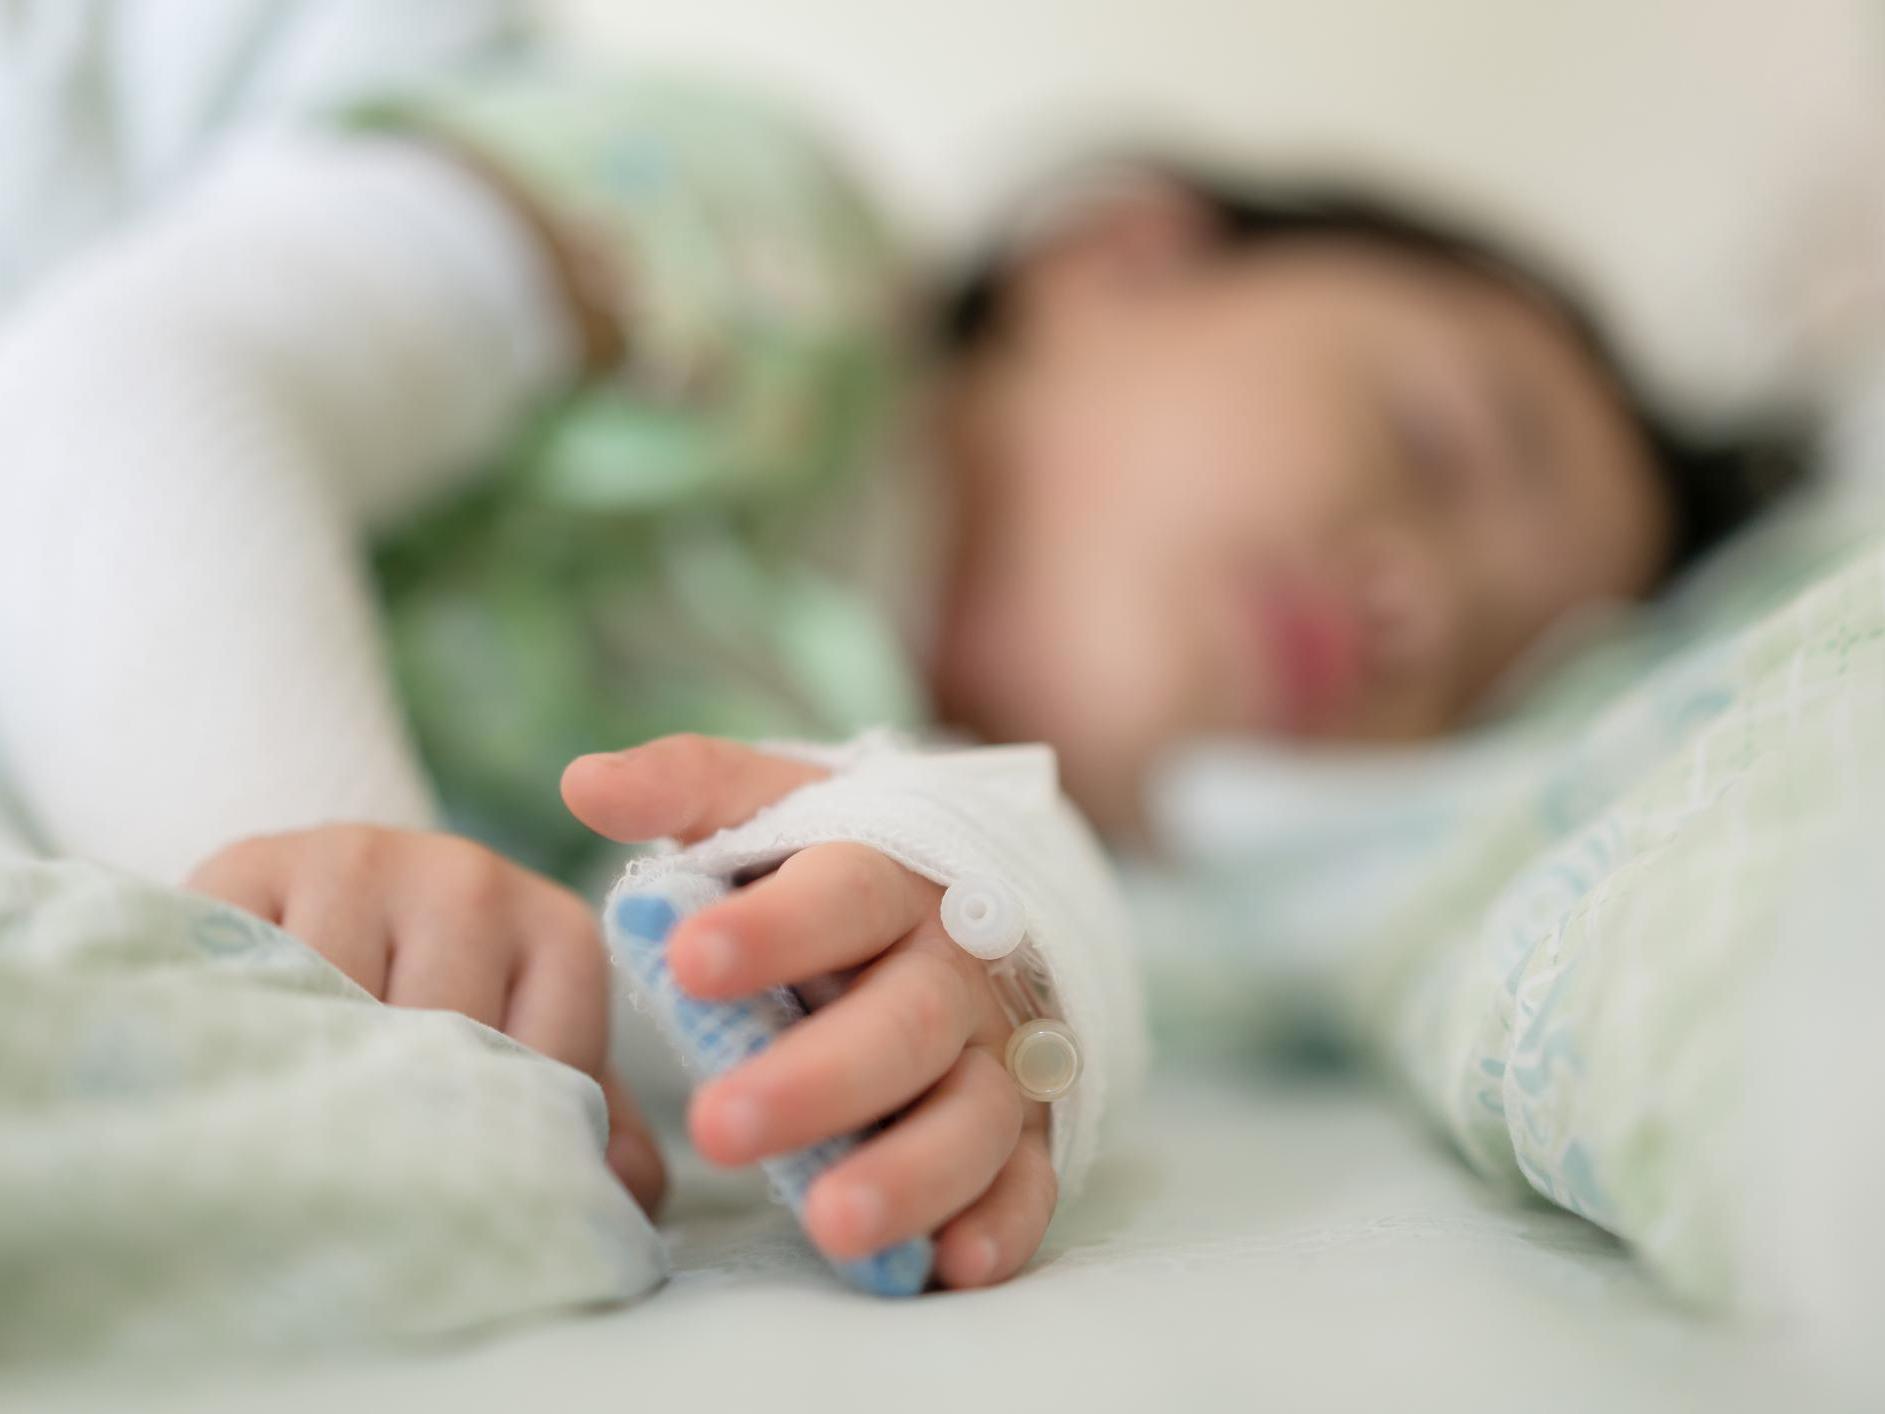 Children displaying symptoms of toxic shock syndrome or Kawasaki disease have been linked to coronavirus in the UK and the US